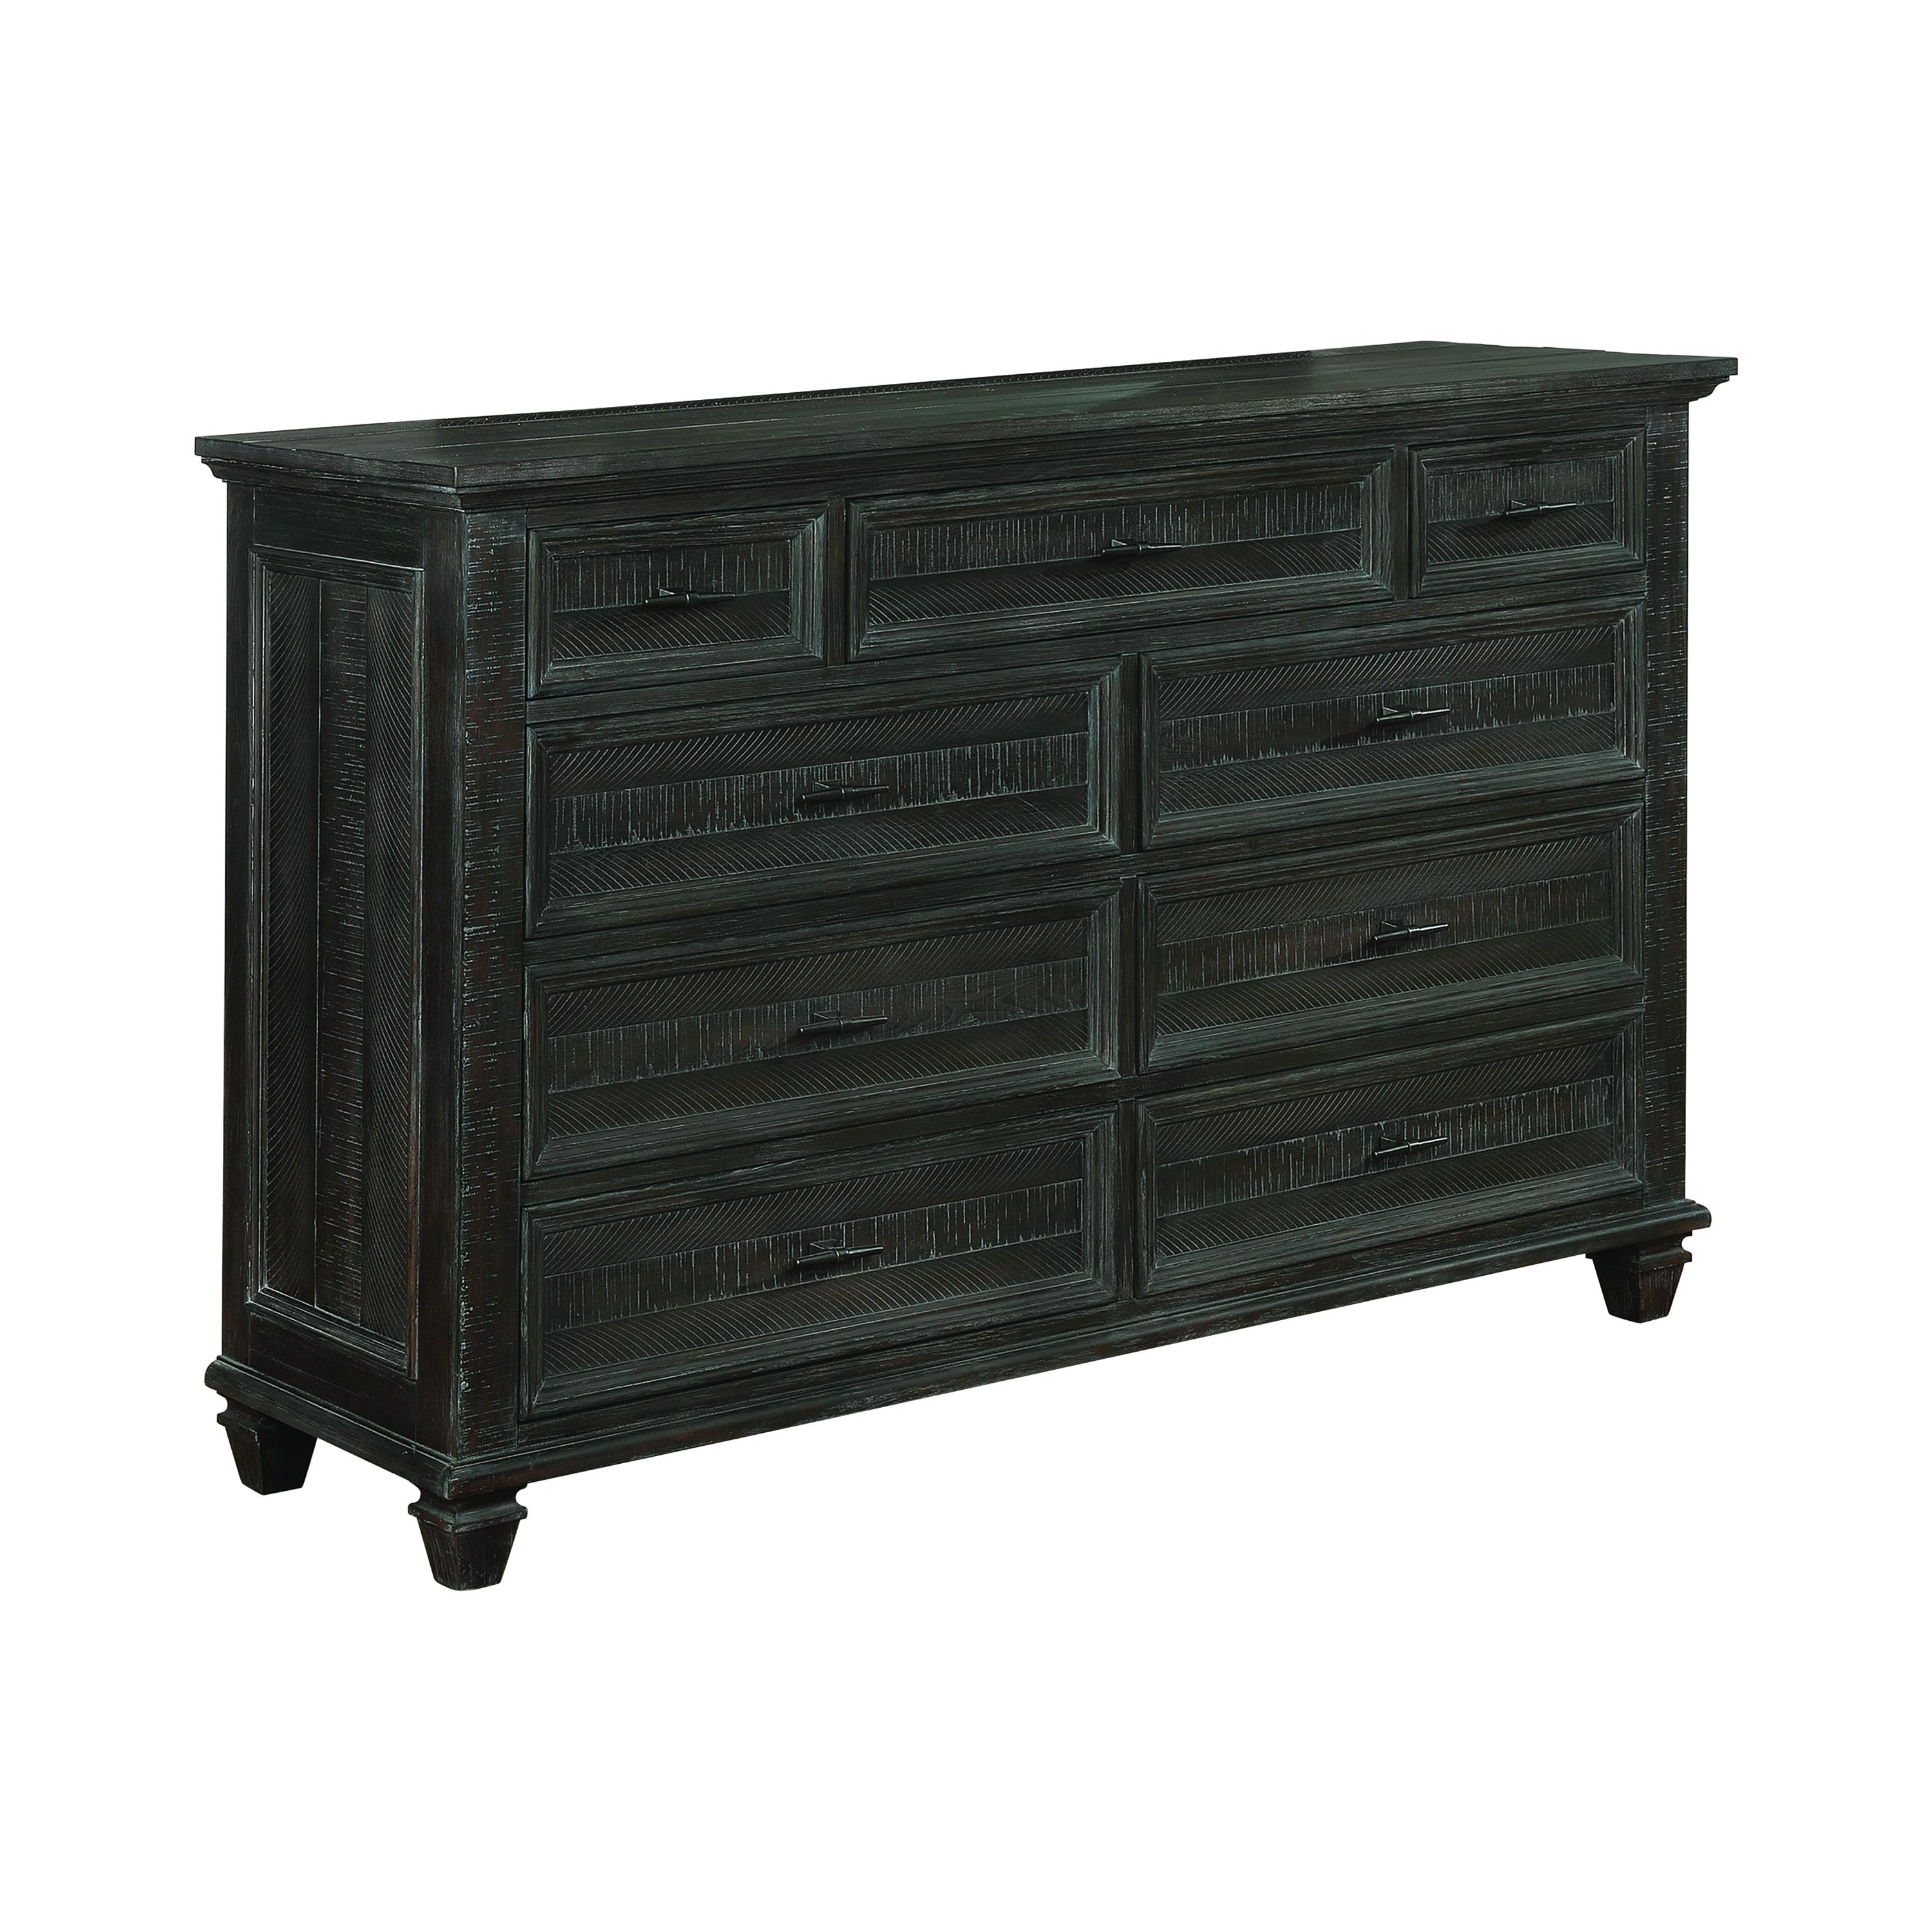 Transitional Dresser 222883 Atascadero 222883 in Brown 